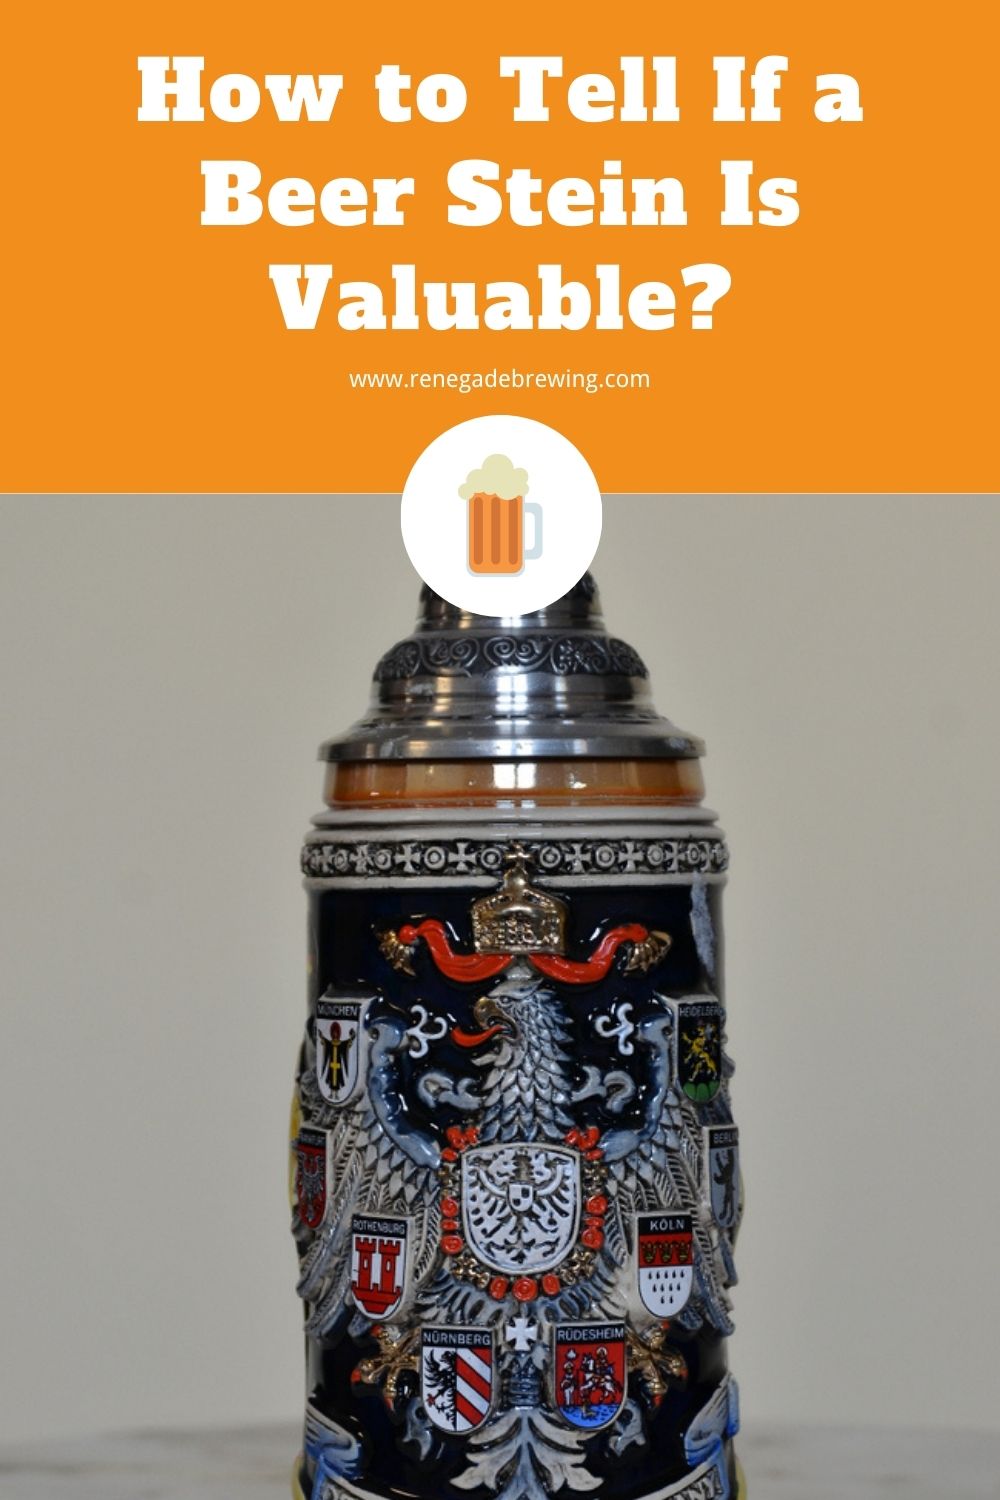 How to Tell If a Beer Stein Is Valuable (Tips to Avoid Fake) 2